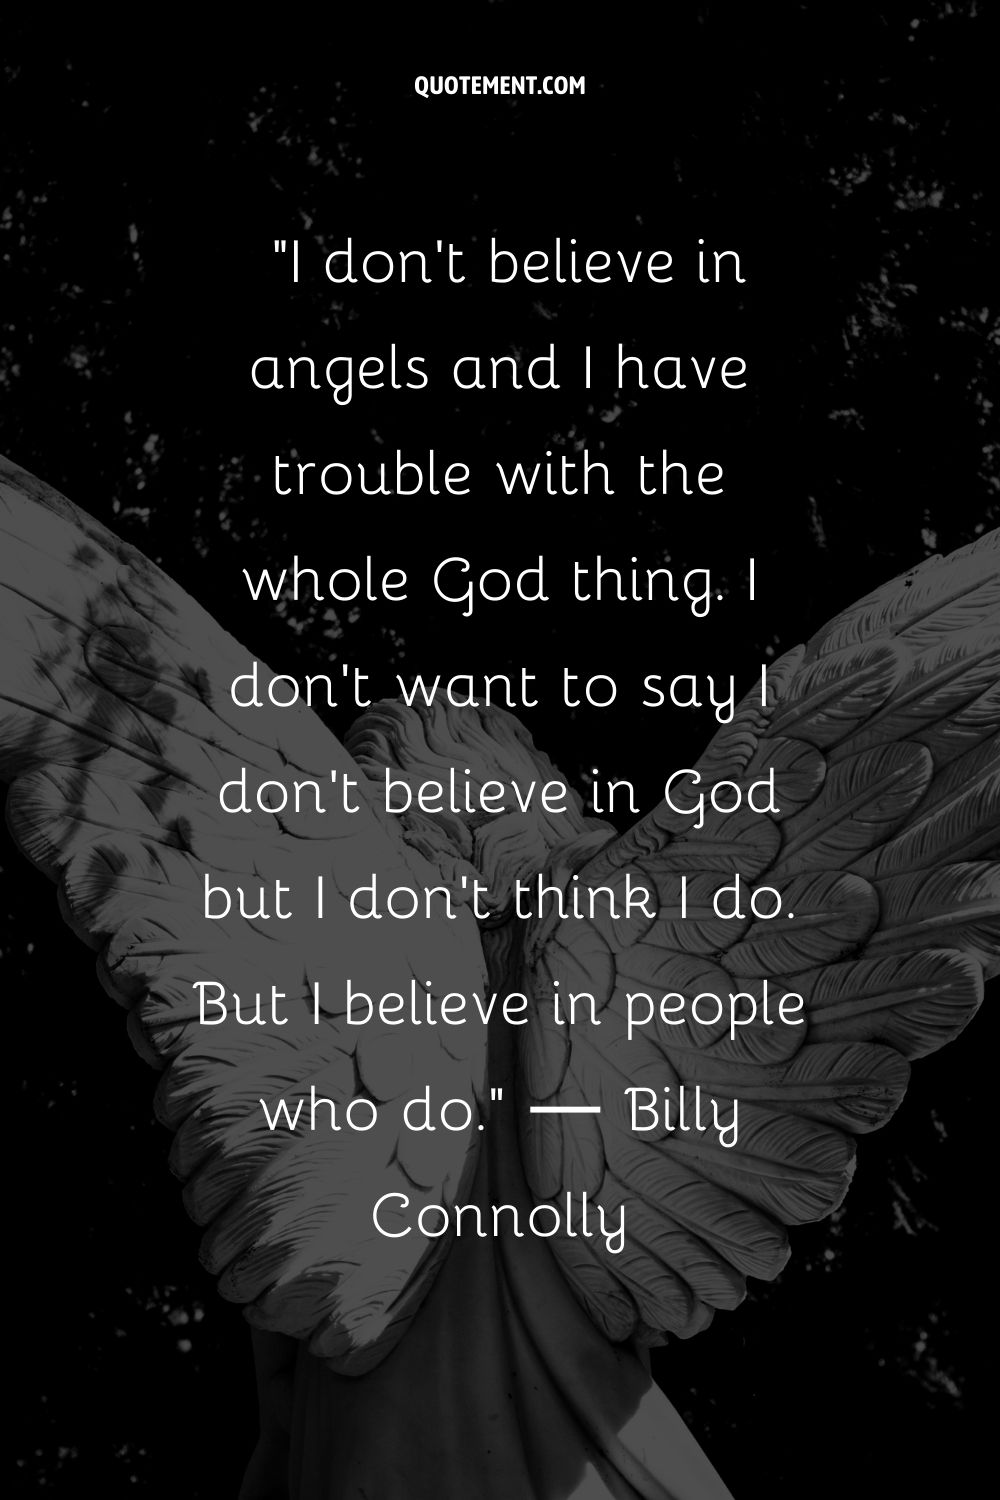 I don't believe in angels and I have trouble with the whole God thing.